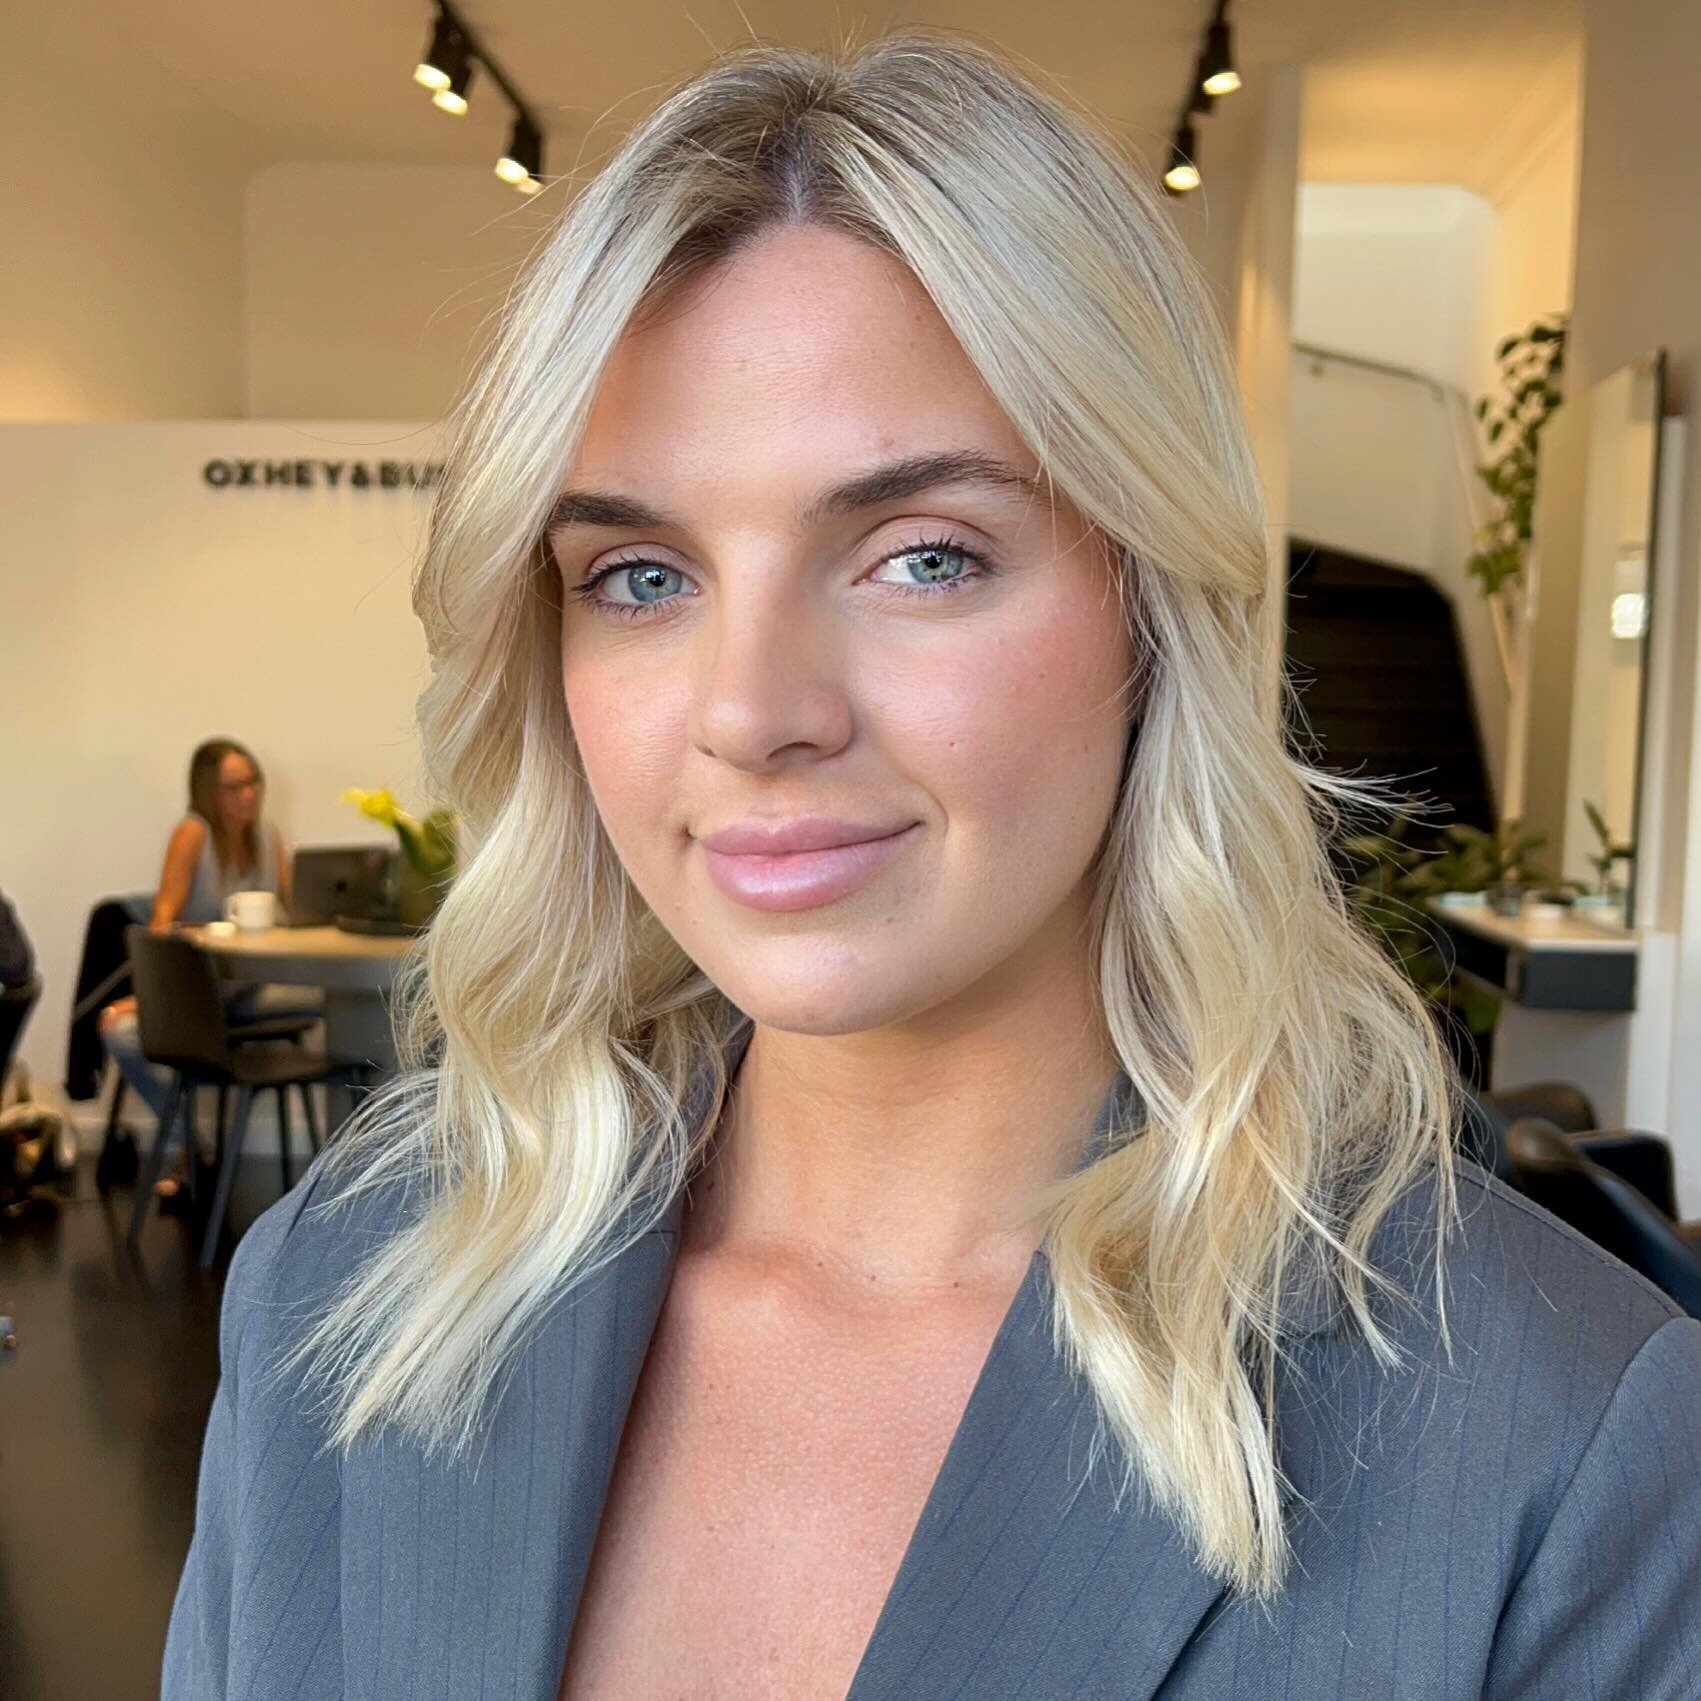 Chelsea created this stunning bright blonde on @livhavers, using @powernetworkanz + styled with @originalmineral 

We have limited availability remaining for the 1/2 and full head highlight packages with Chelsea within the next few months. Please con